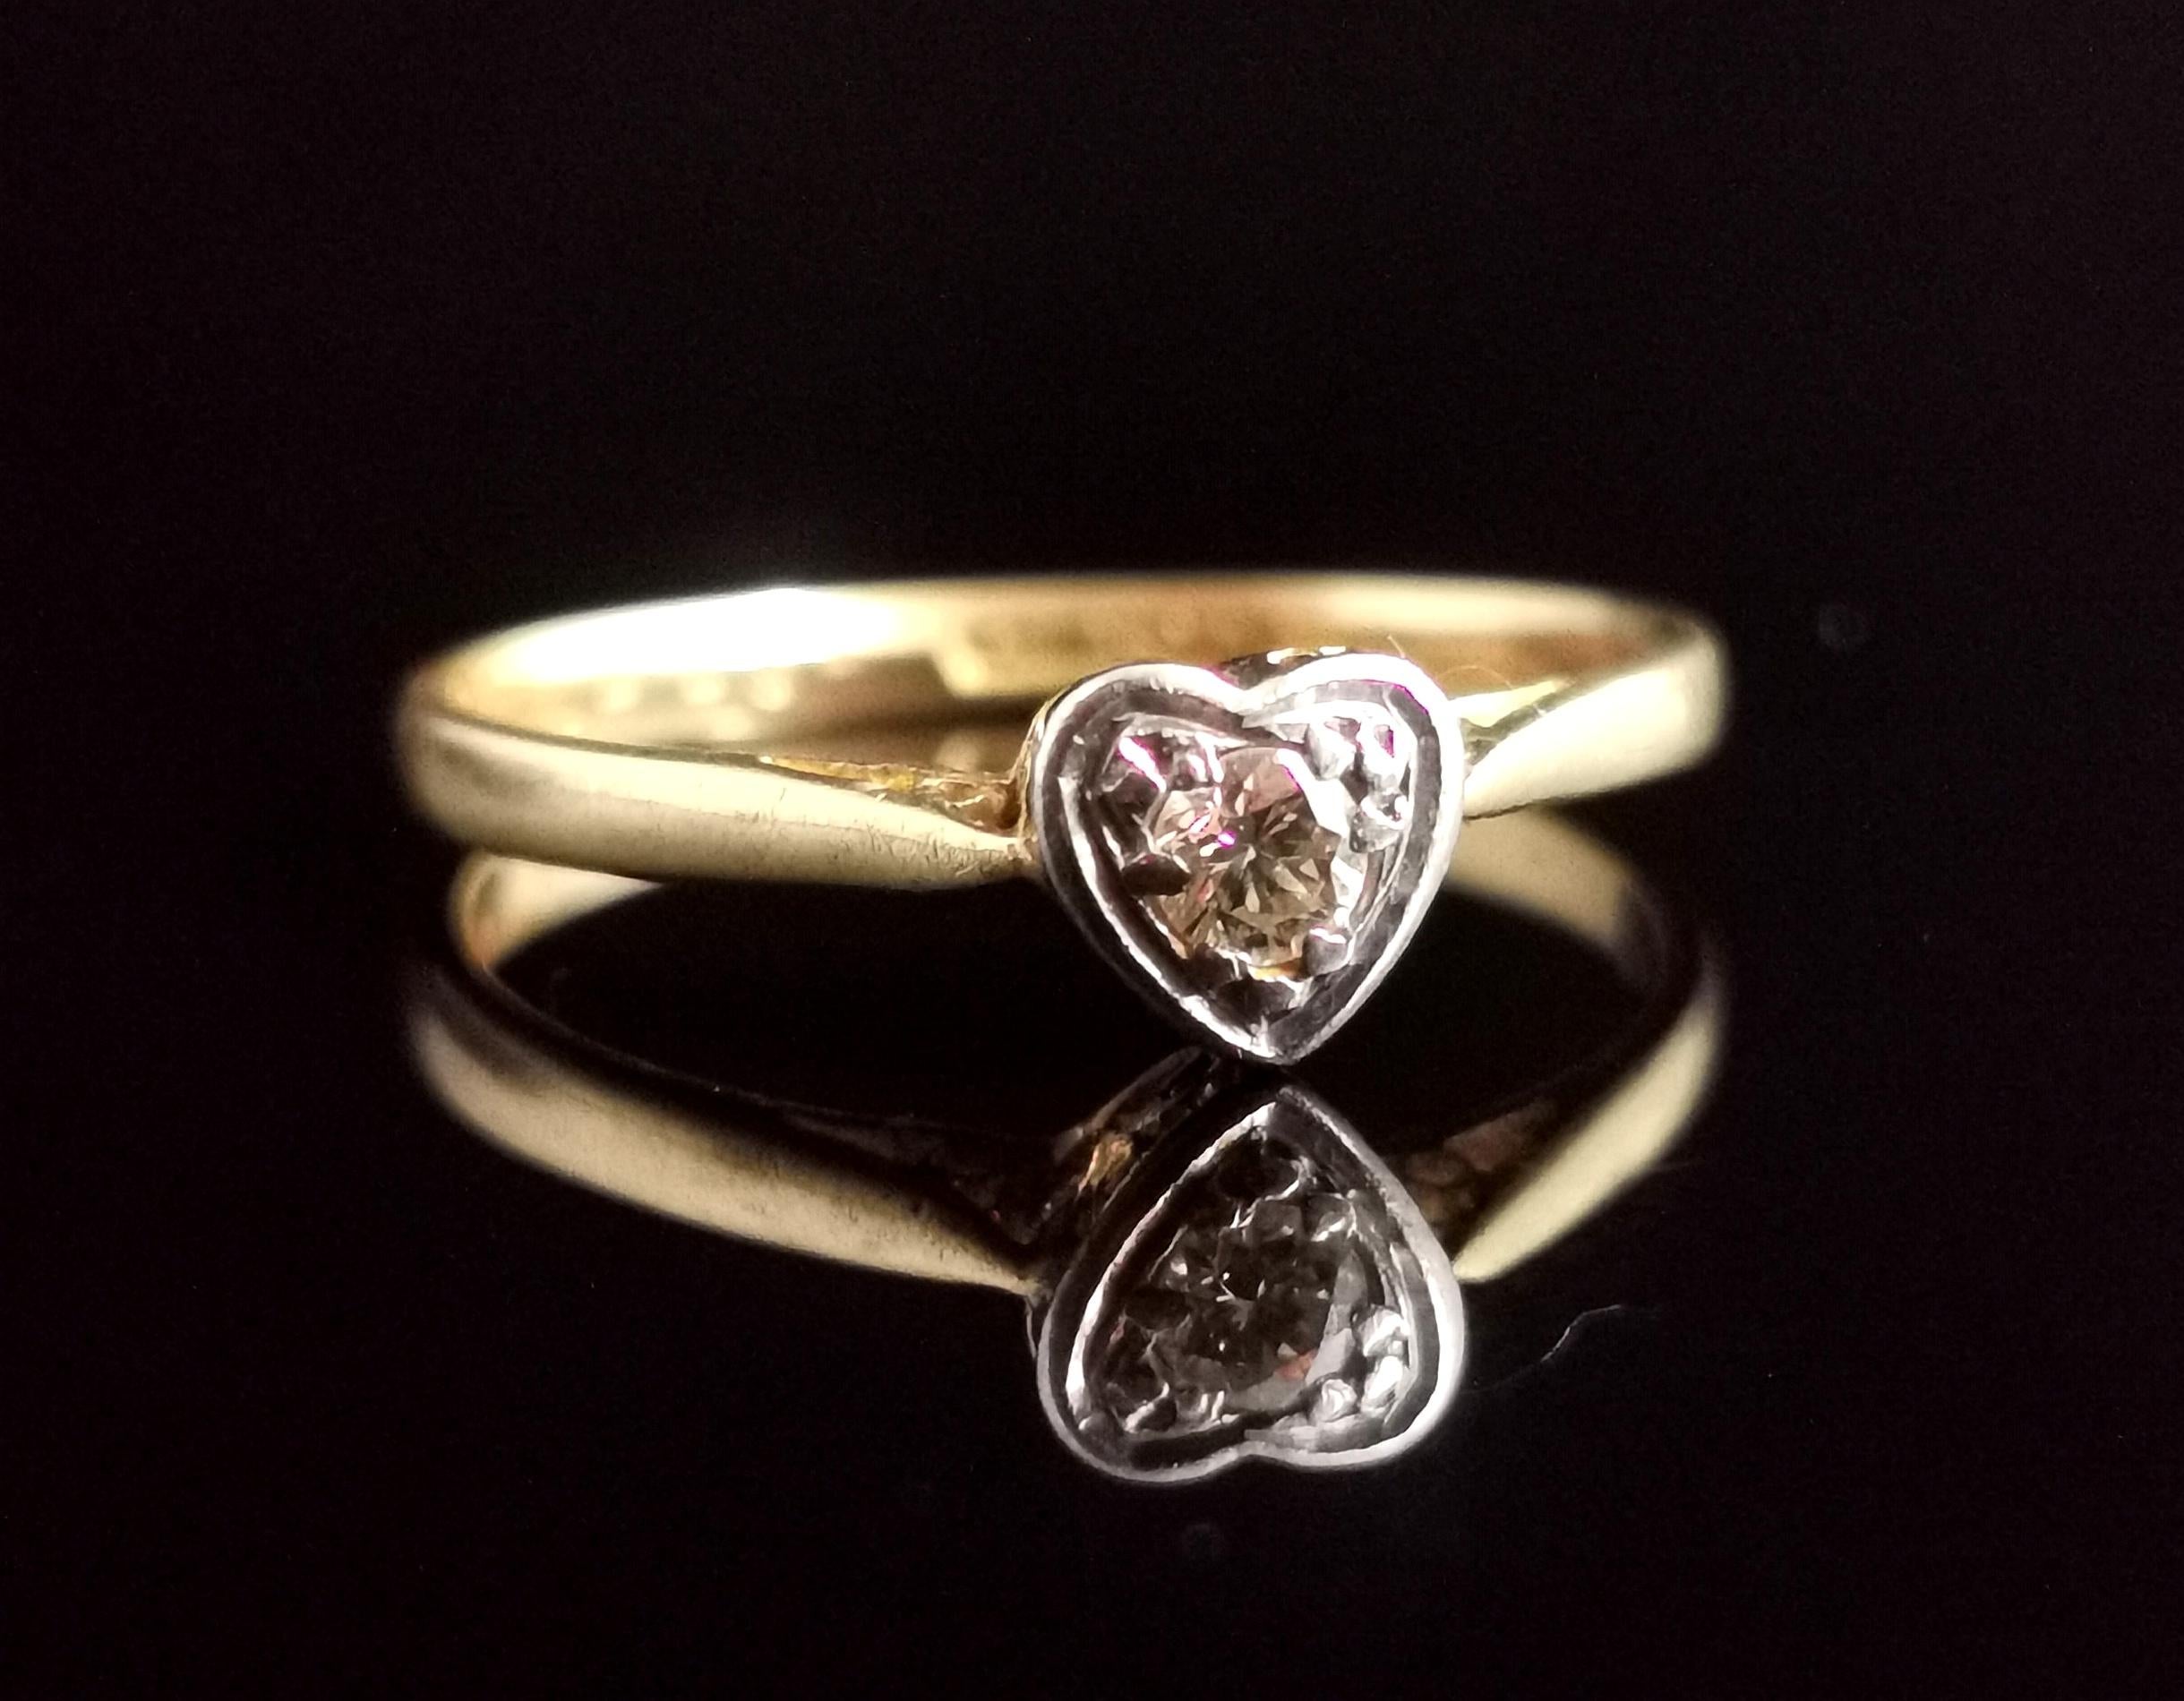 A pretty and romantic vintage Diamond heart ring.

Crafted from rich 18kt yellow gold, Diamond and platinum in an Art Deco style.

It has a rich 18kt yellow gold band leading up to the front platinum setting, it is designed as a heart with the